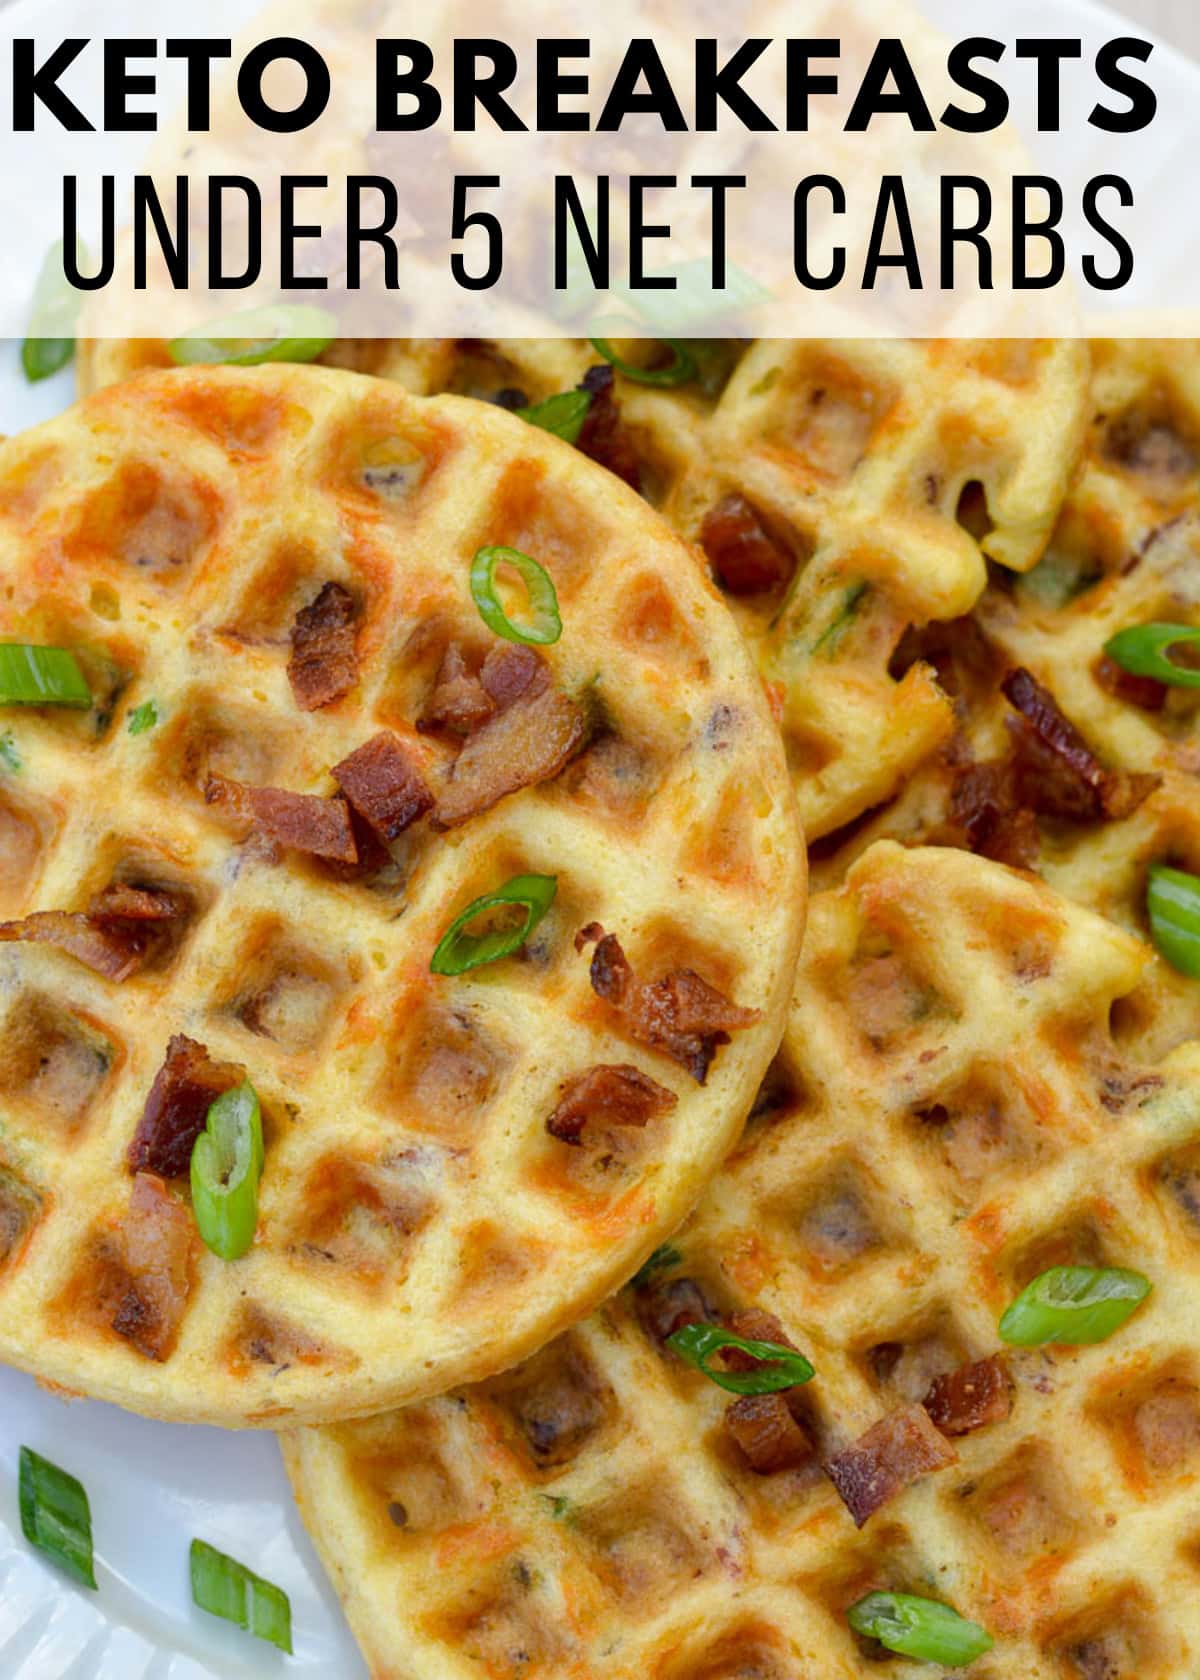 Keto Breakfast Ideas under 5 net carbs! These easy keto breakfast recipes are sure to fill you up and give you fuel for the day without loads of carbs!